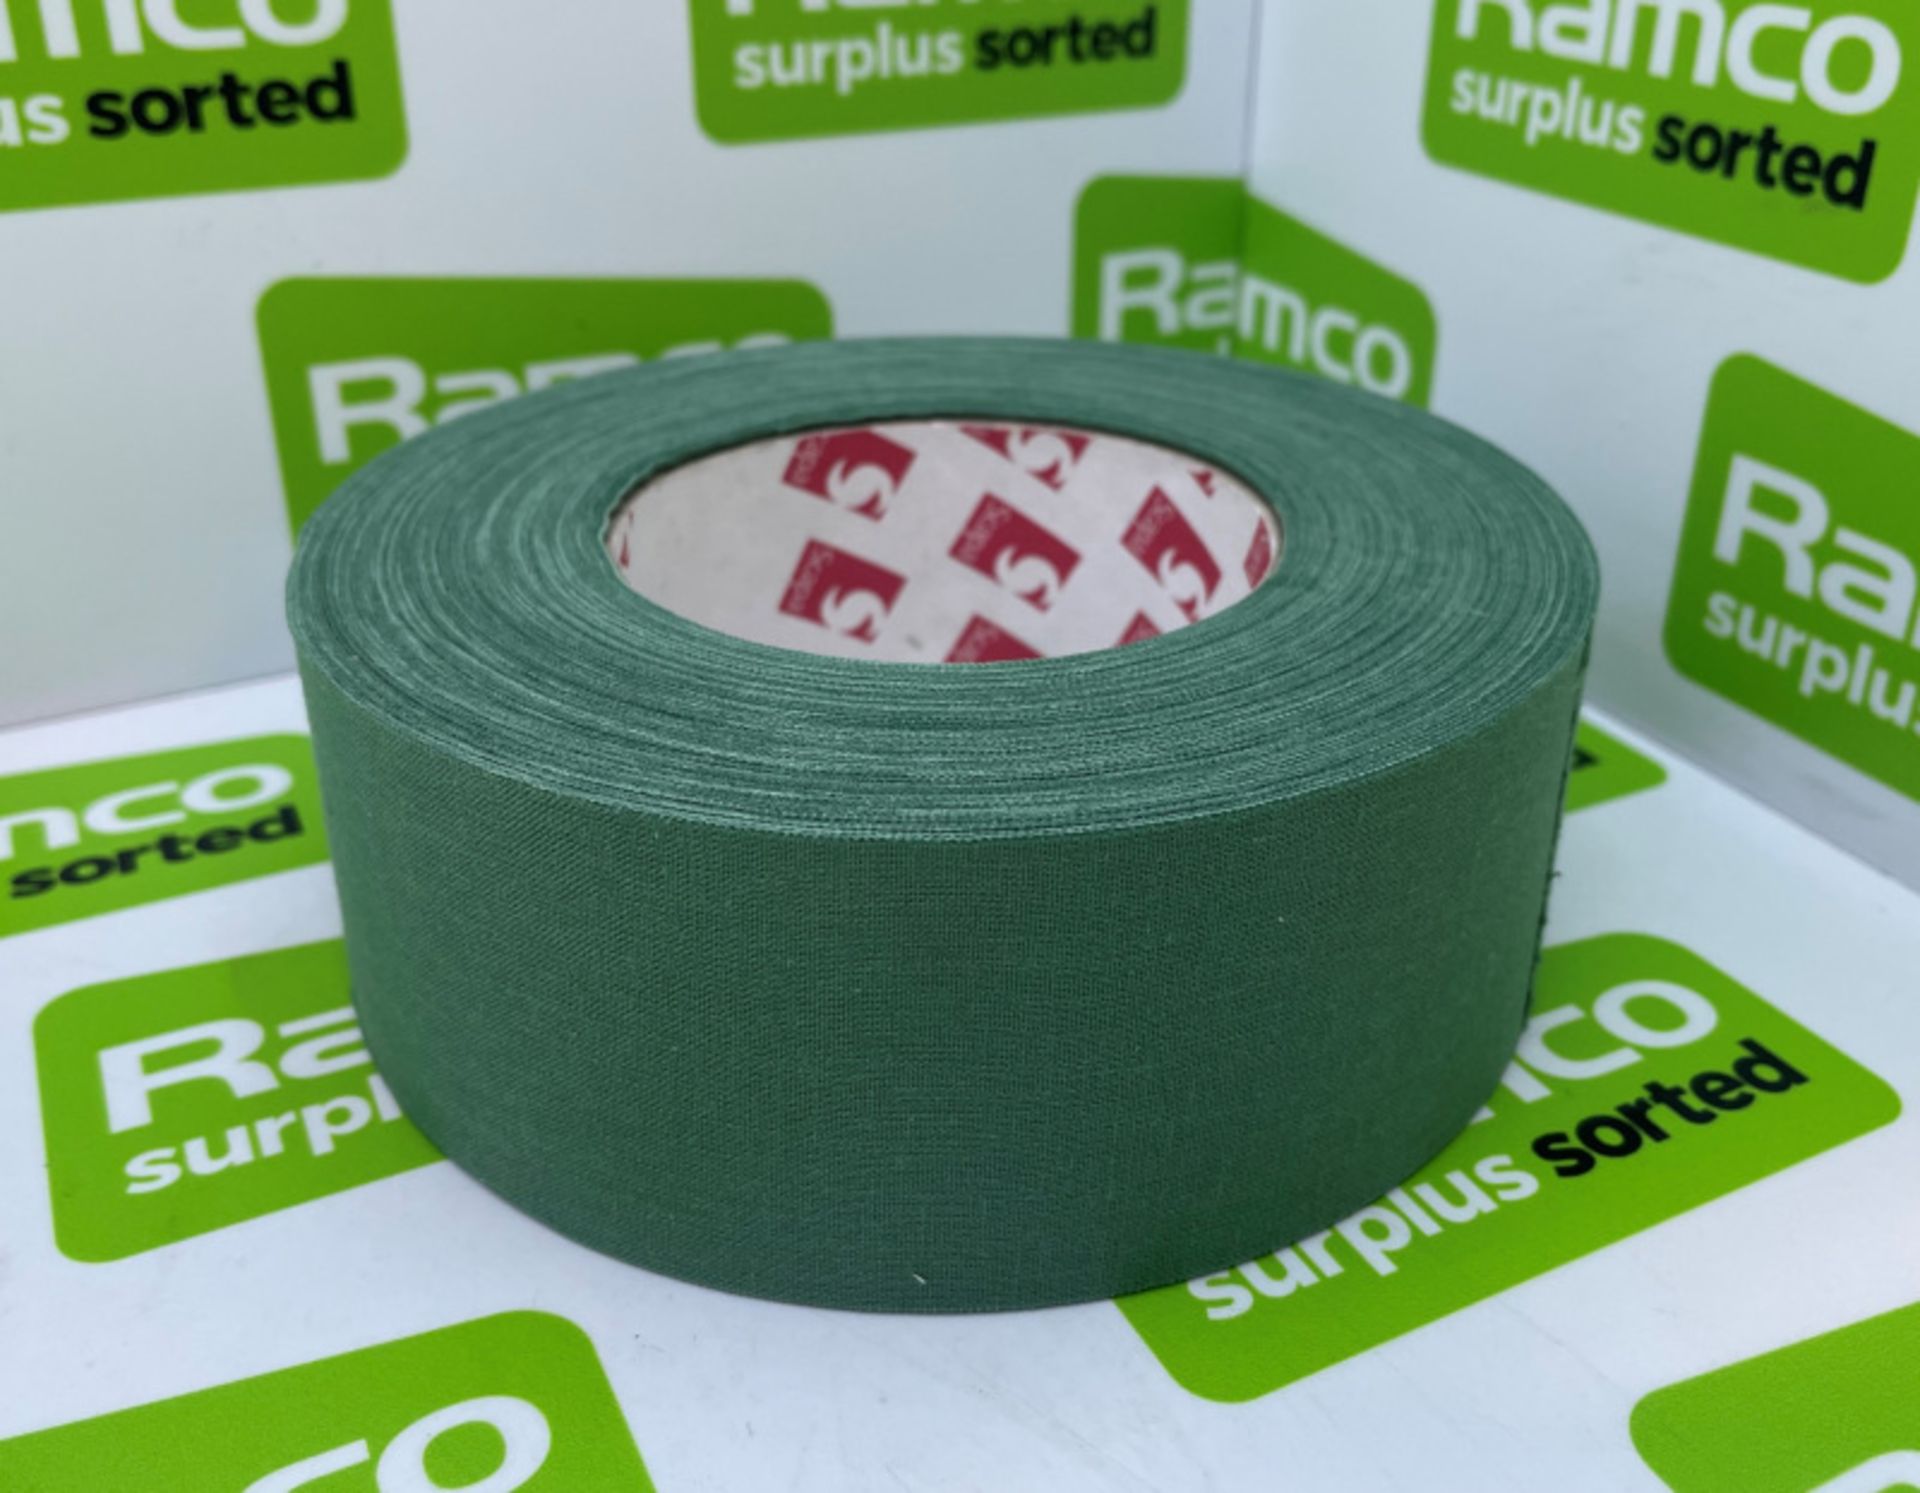 Scapa 3302 Tape - Olive Green - 50mm x 50M rolls - 16 rolls per box - 48 boxes - Image 2 of 5